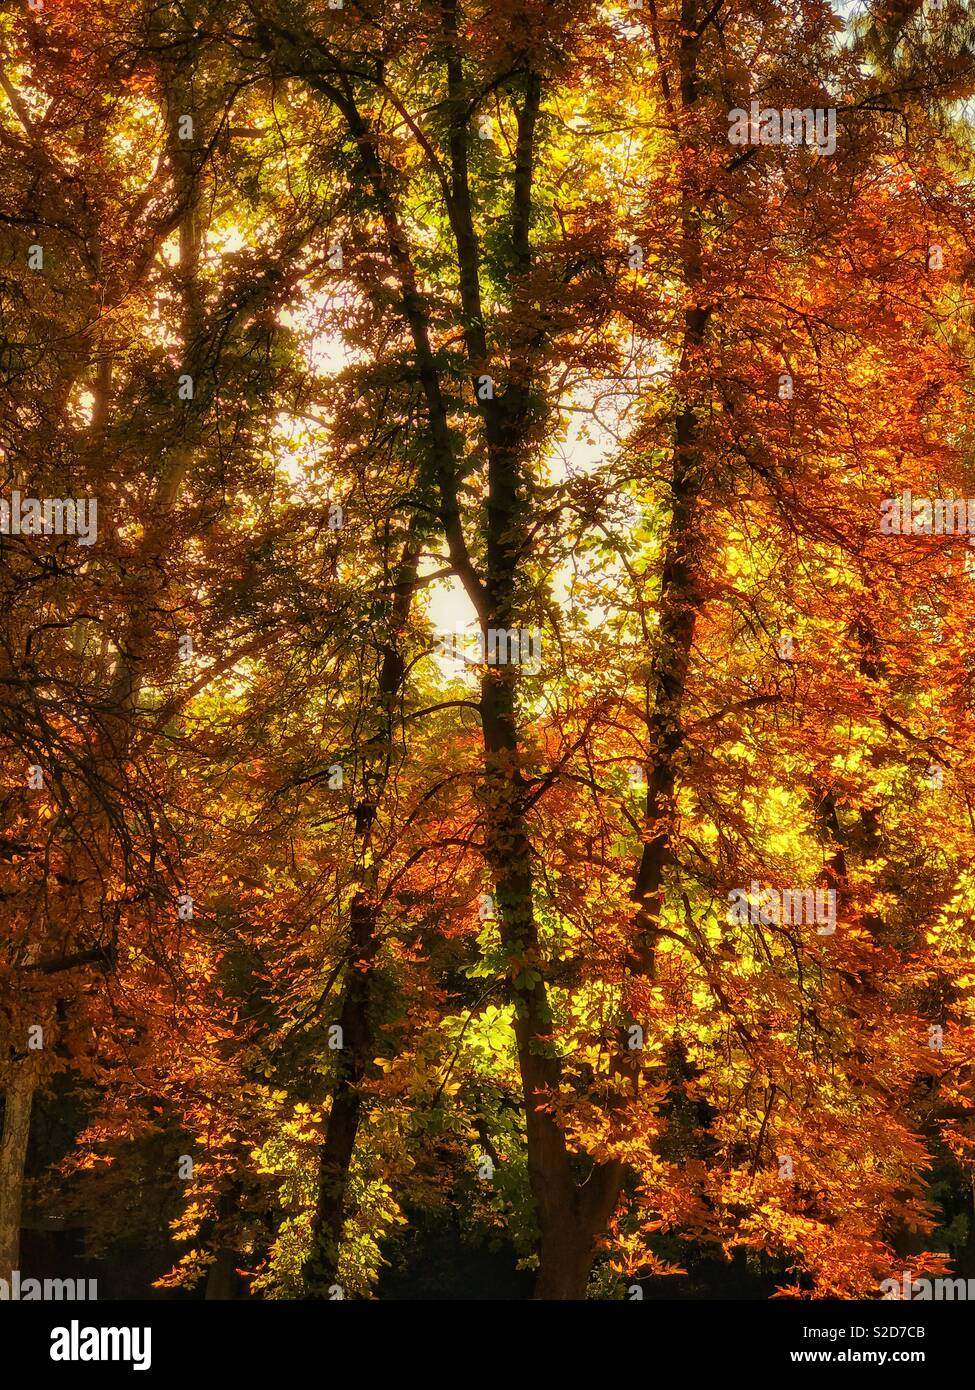 The colours of early autumn. Green leaves turn to orange, then brown. An image with potential multiple uses. Photo Credit - © COLIN HOSKINS. Stock Photo